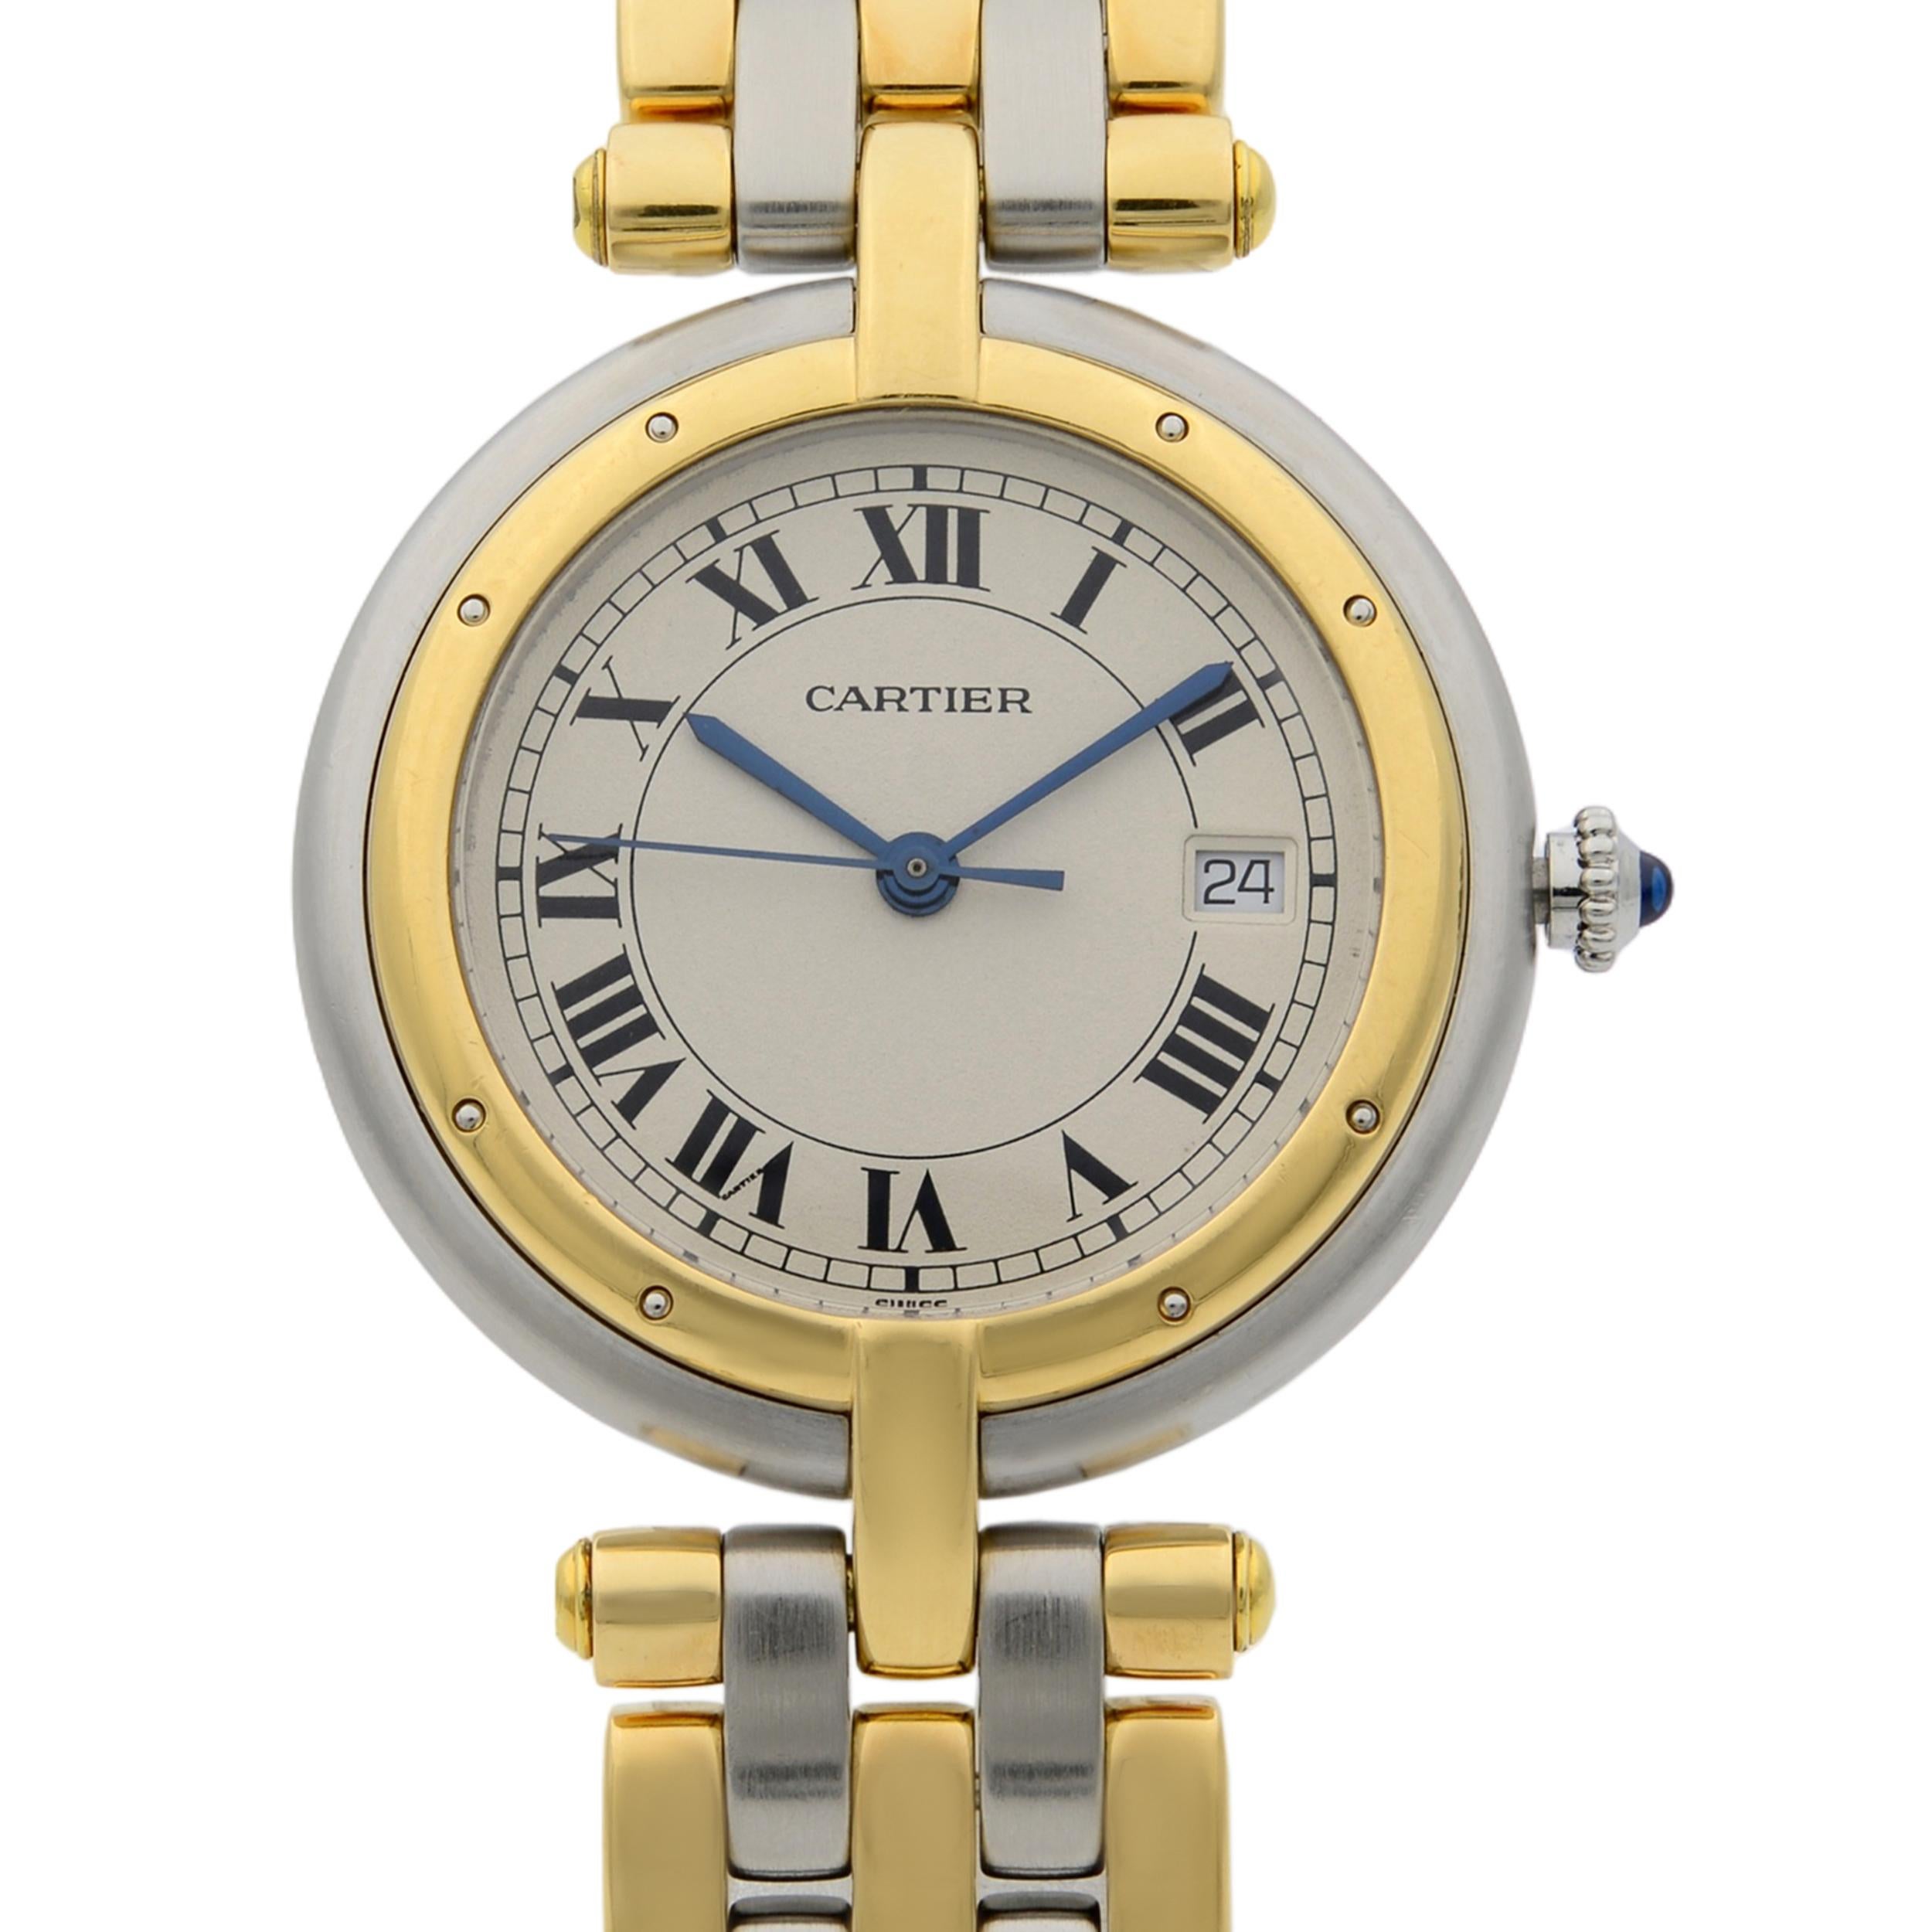 This pre-owned Cartier Panthere  183964 is a beautiful Ladie's timepiece that is powered by quartz (battery) movement which is cased in a stainless & solid gold case. It has a round shape face, date indicator dial and has hand roman numerals style